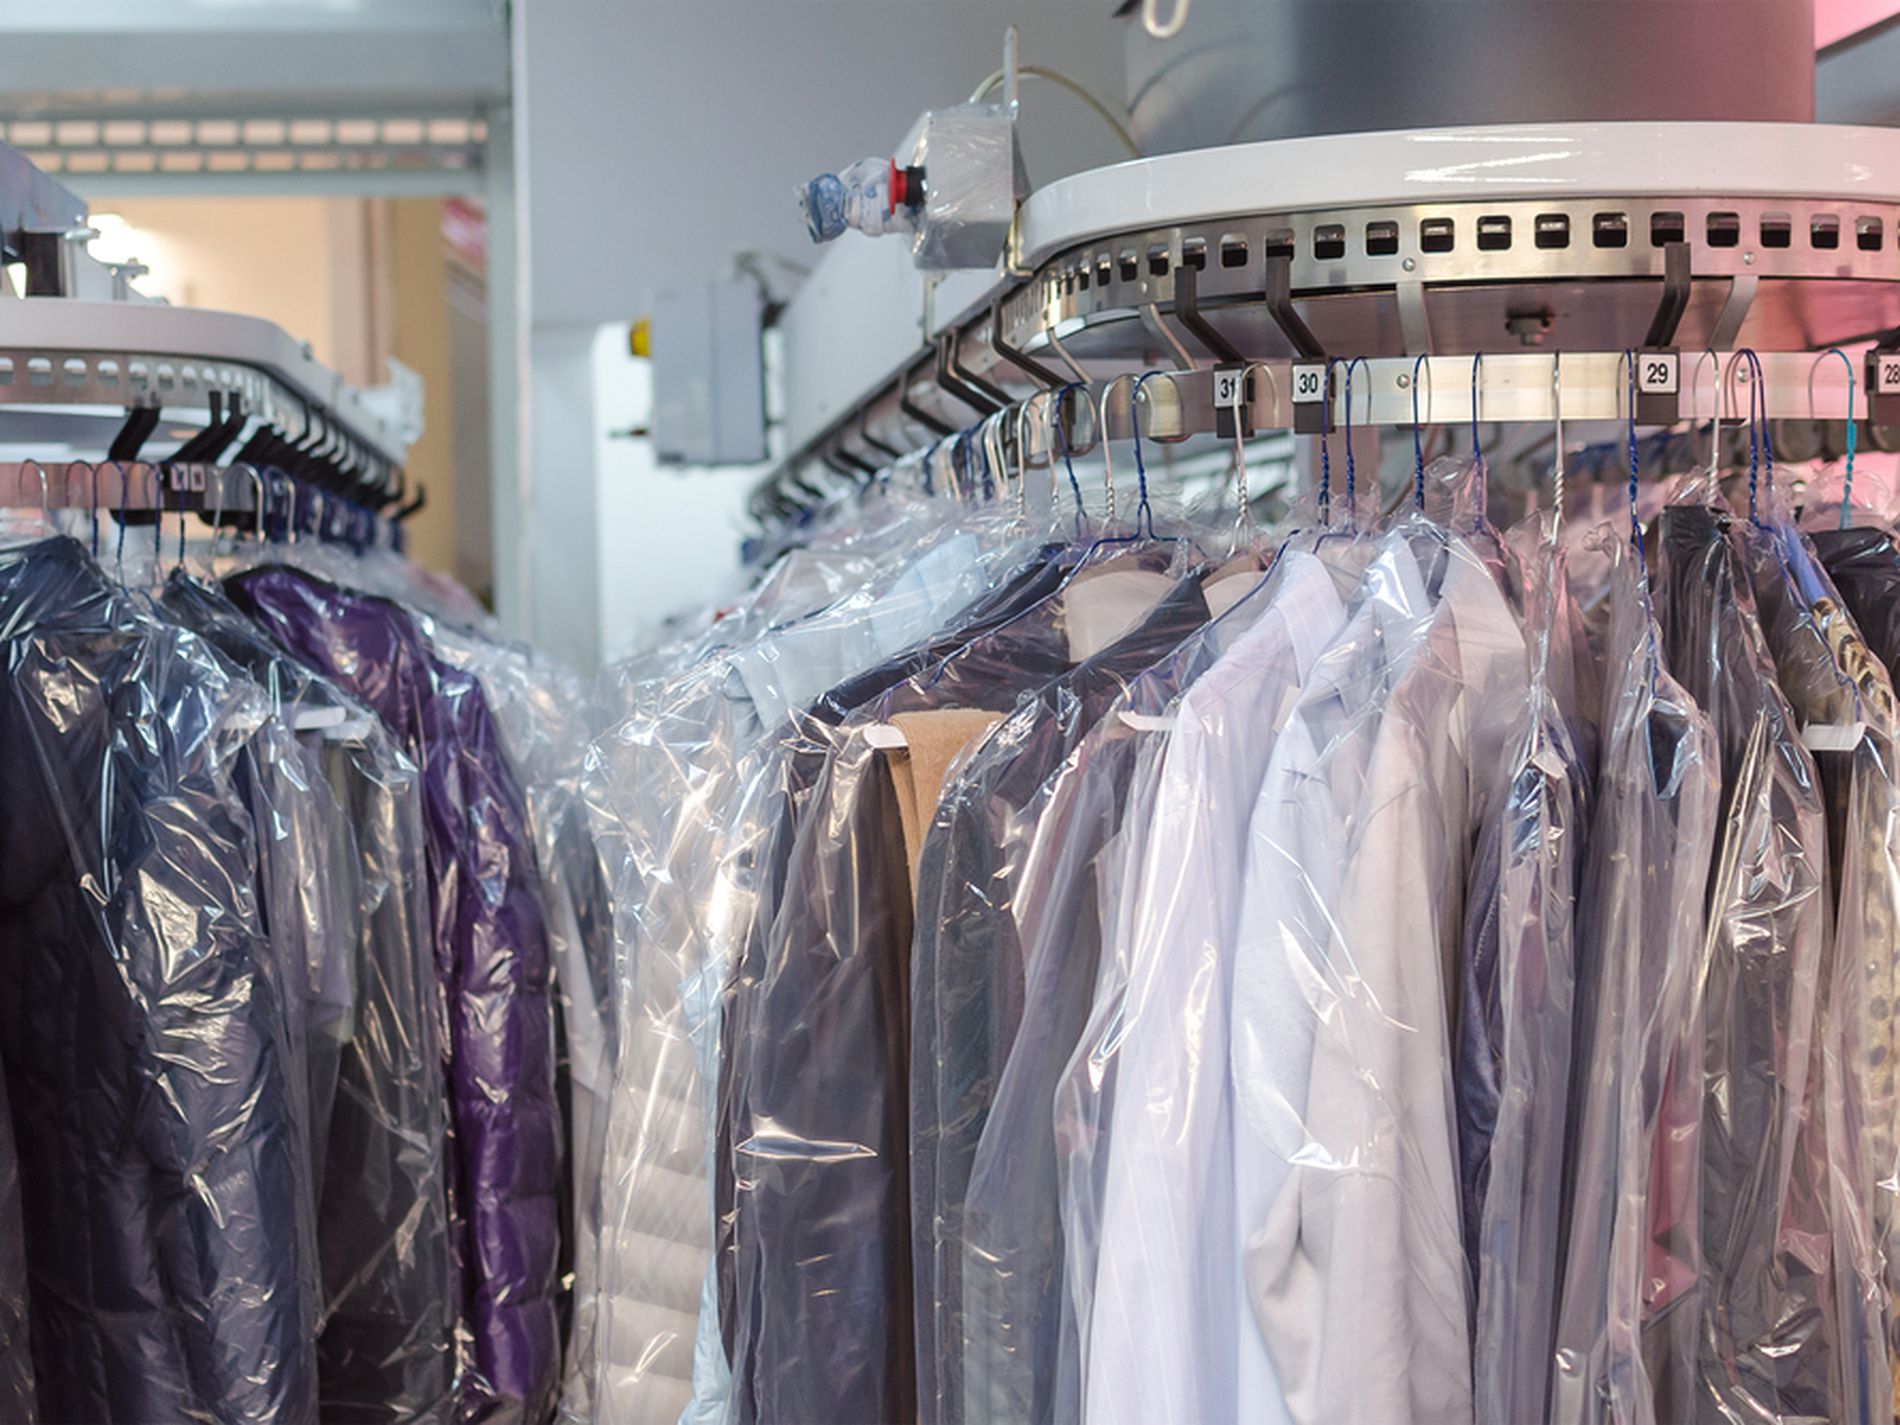 DRY CLEANING BUSINESS FOR SALE 